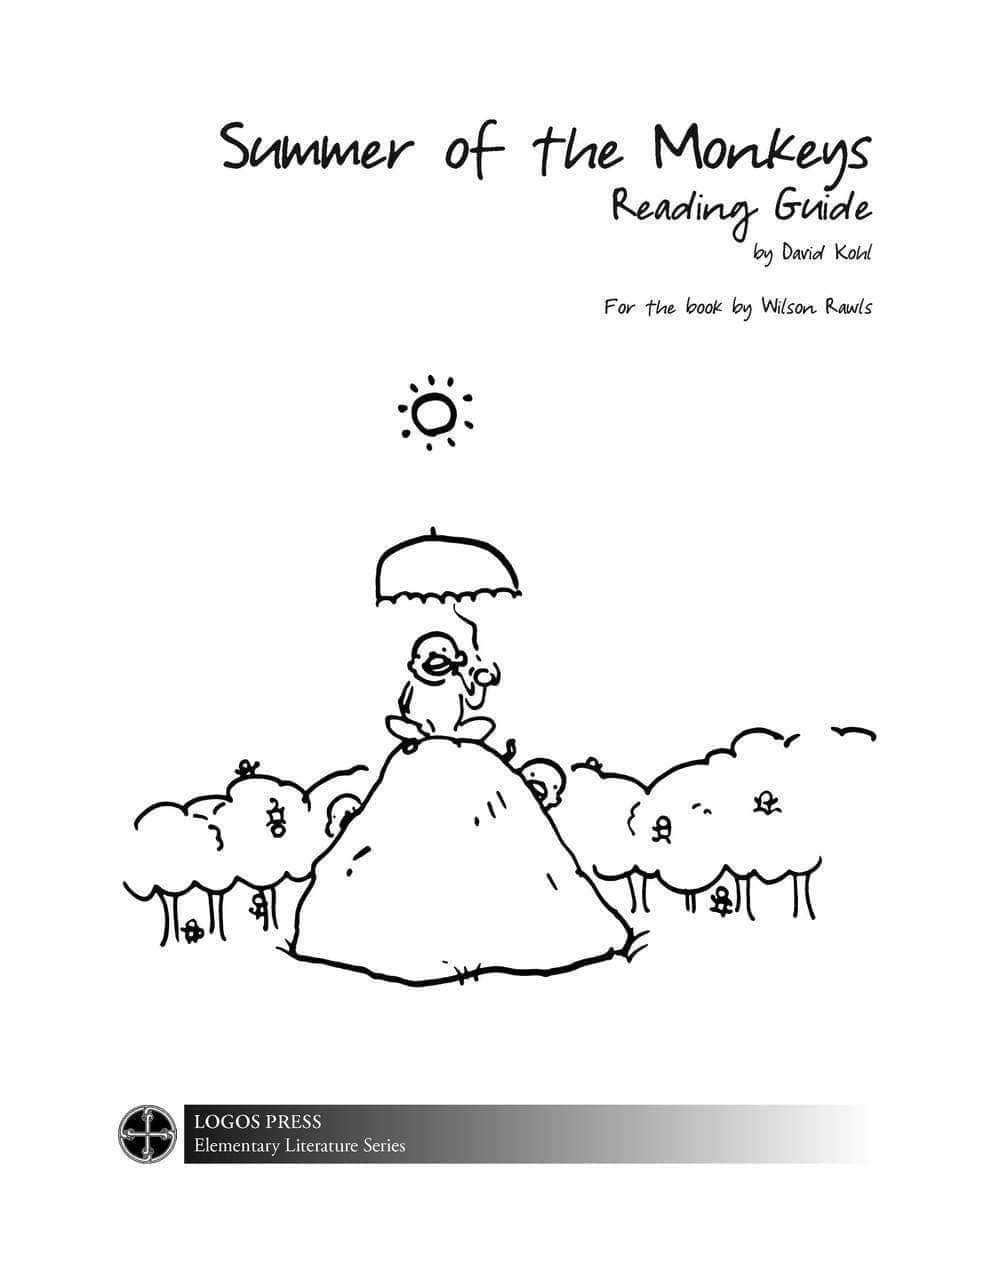 Summer of the Monkeys - Reading Guide (Download)